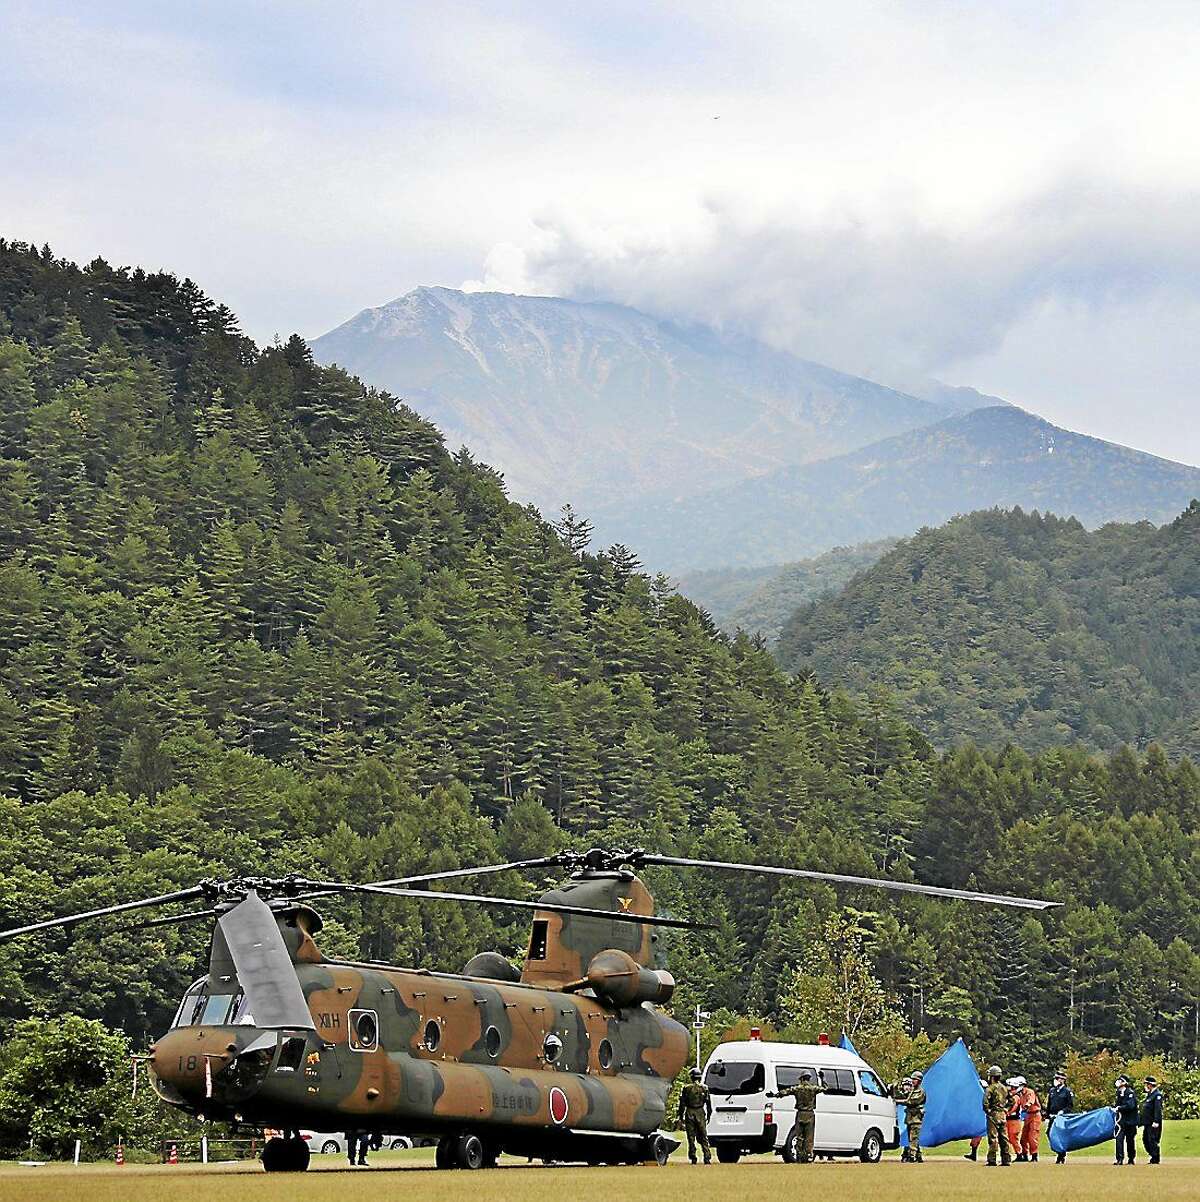 A Ground Self-­Defense Force CH­47 transport helicopter is on standby in Ontake, Nagano Prefecture. Rescue operations at Mount Otake were suspended Tuesday morning because of signs that volcanic activity could resume.